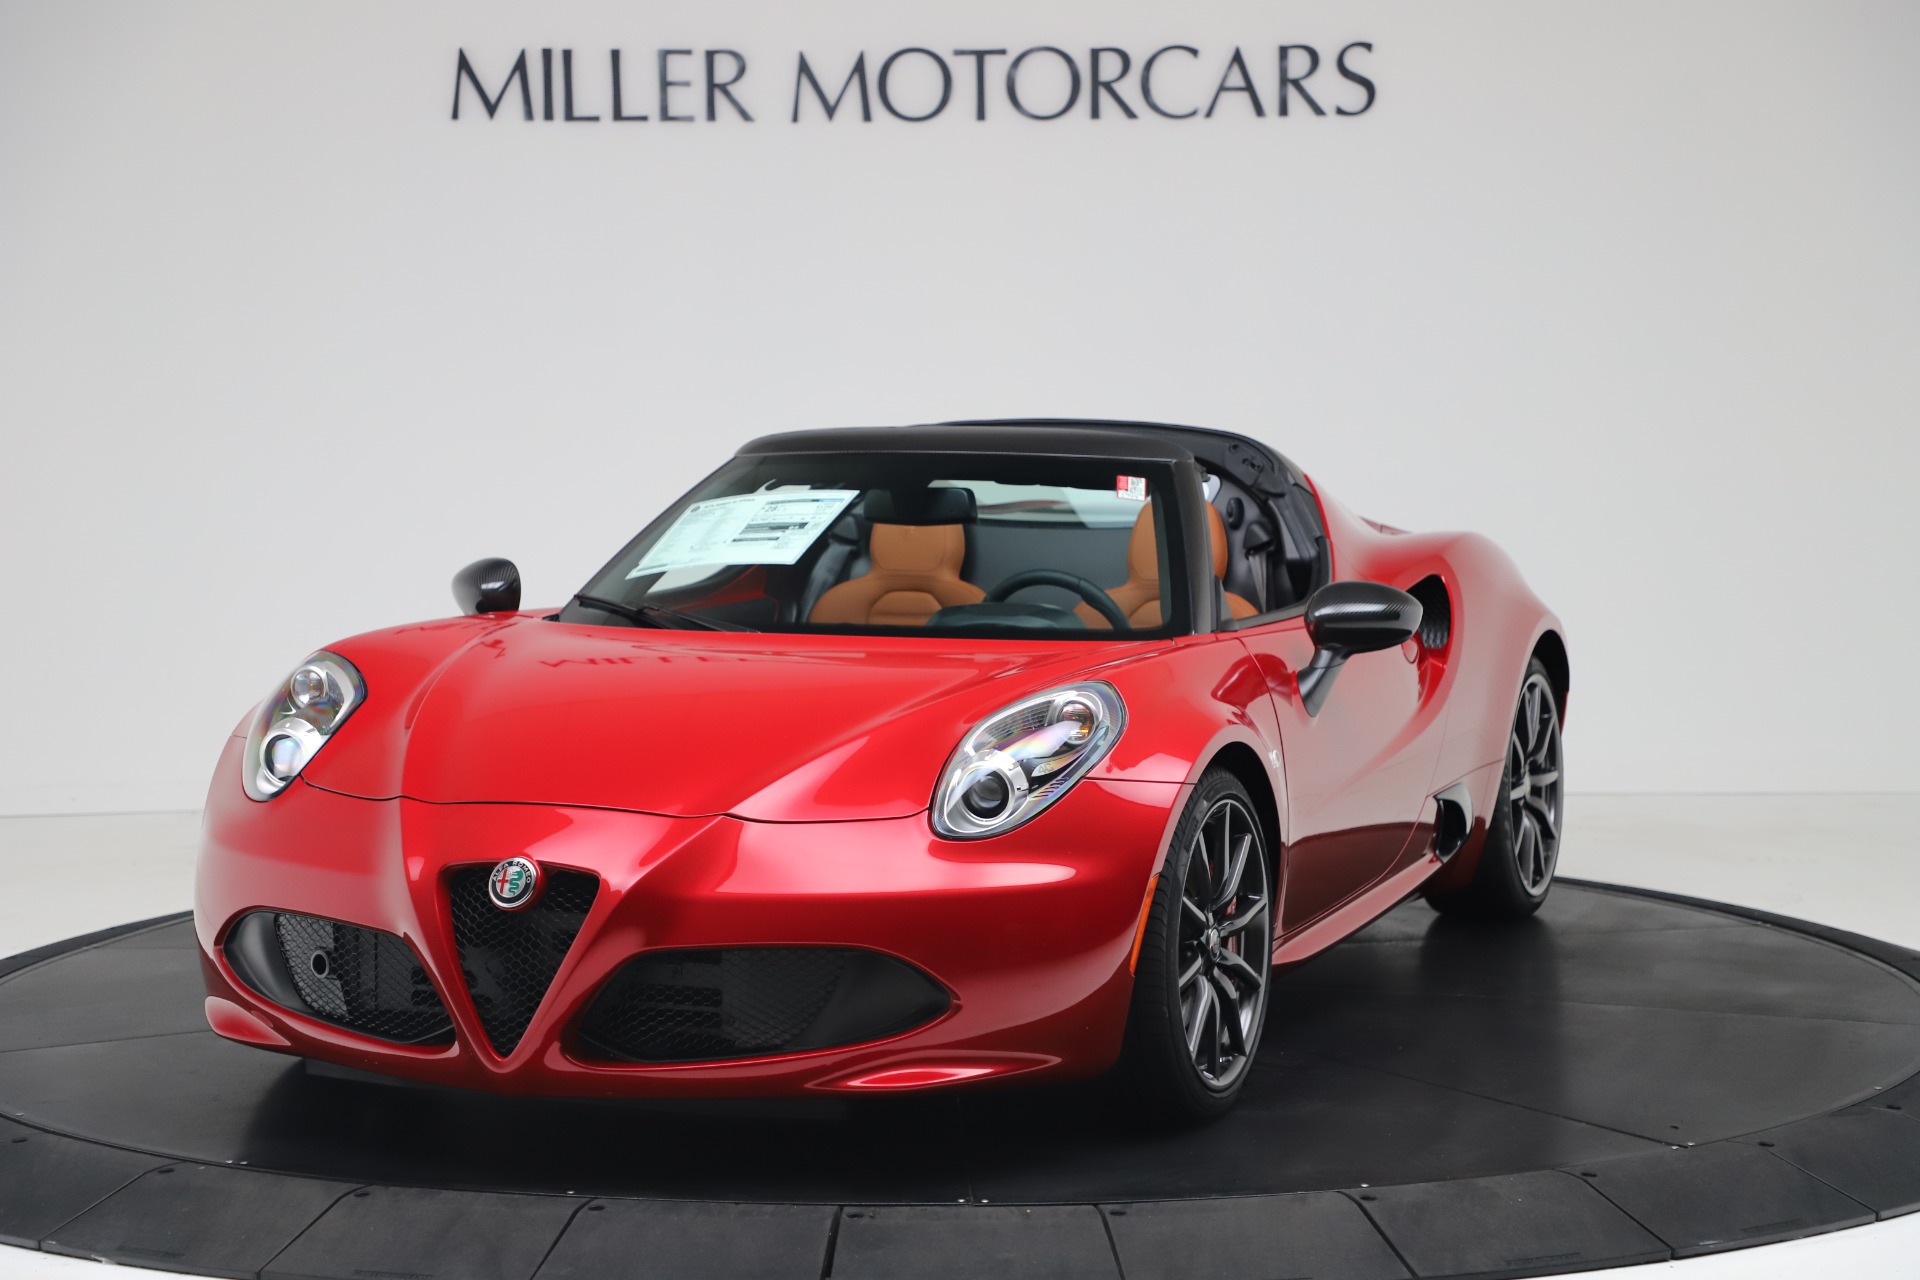 New 2020 Alfa Romeo 4C Spider for sale Sold at Bentley Greenwich in Greenwich CT 06830 1